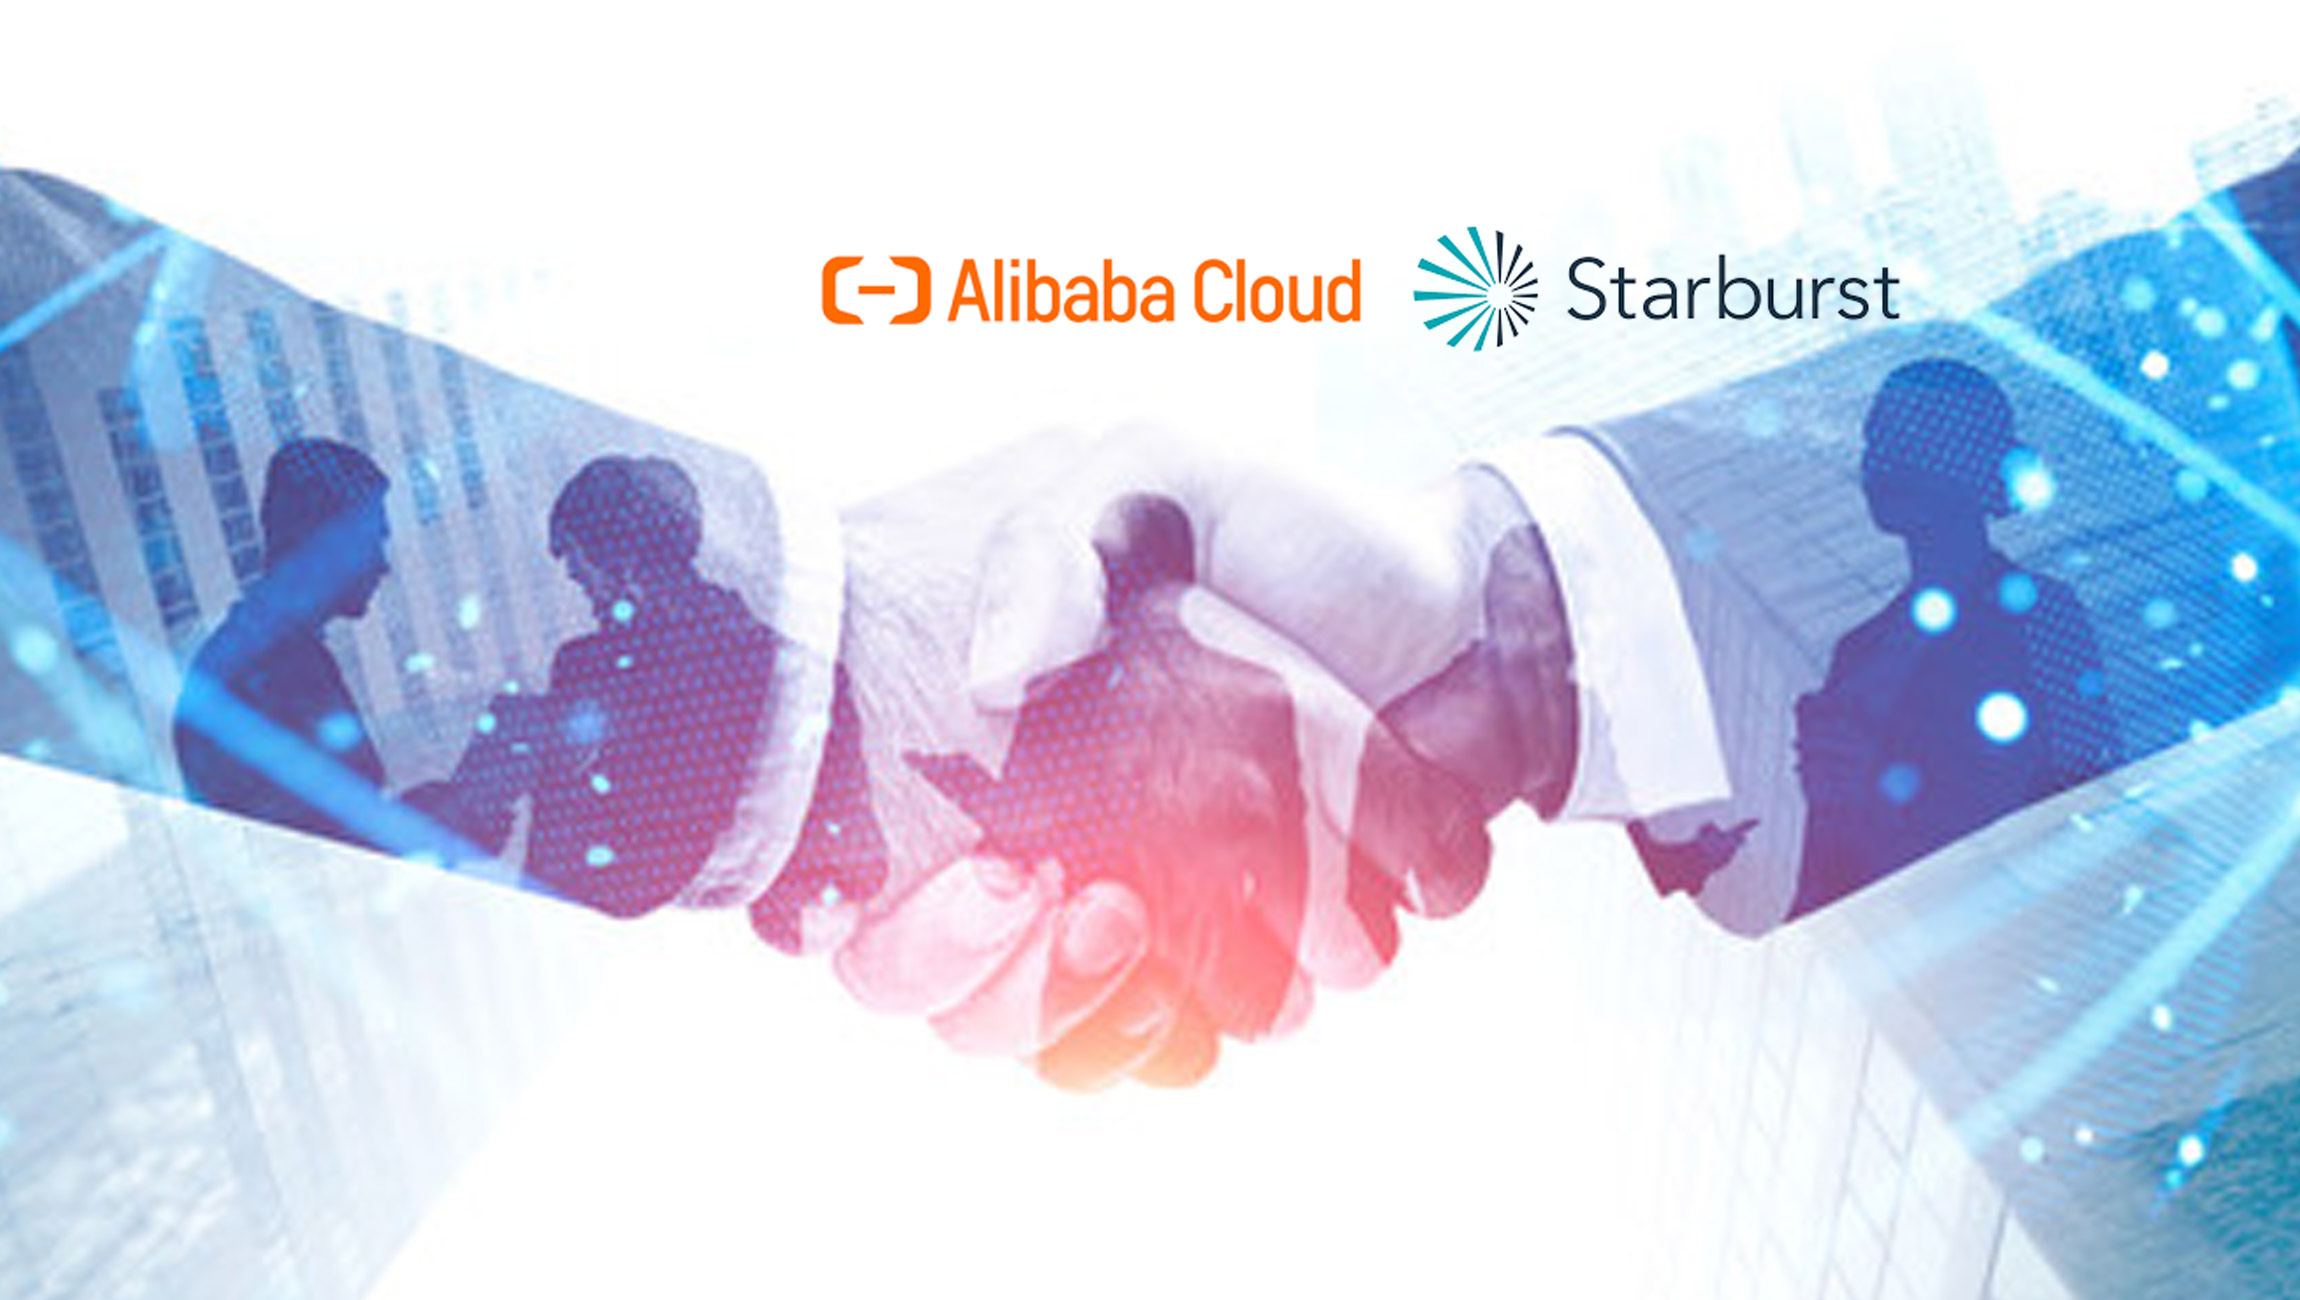 Alibaba Cloud Forms Partnership with Starburst To Bring The Analytics Engine For Data Mesh to Asia-Pacific Region